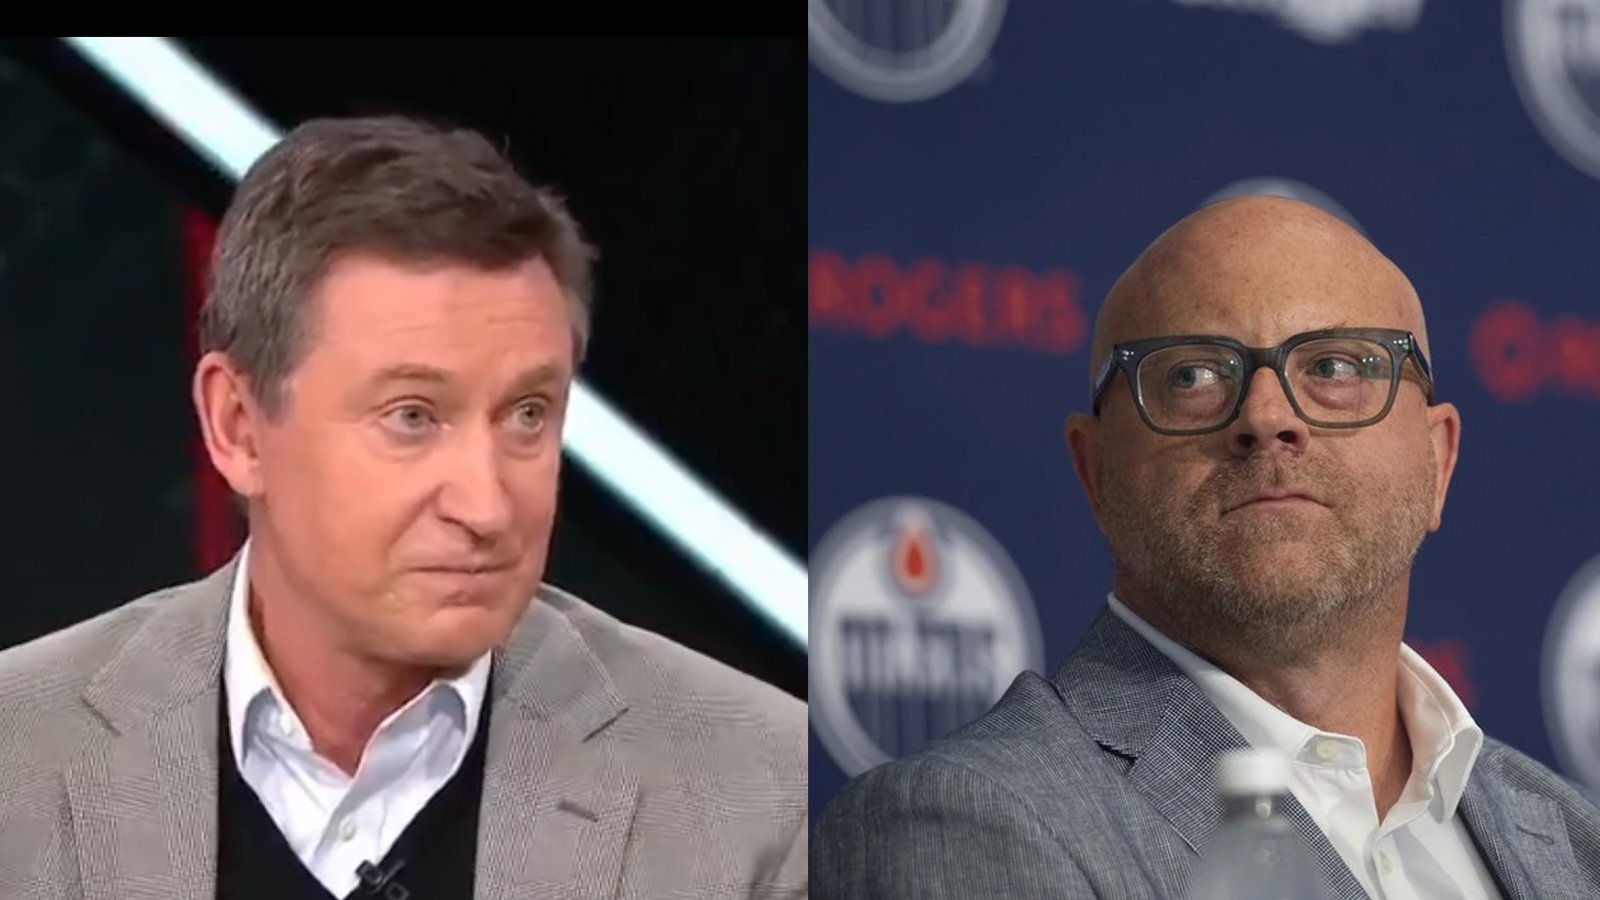 Wayne Gretzky lands on hot seat as comments resurface following Stan Bowman’s hire in Edmonton